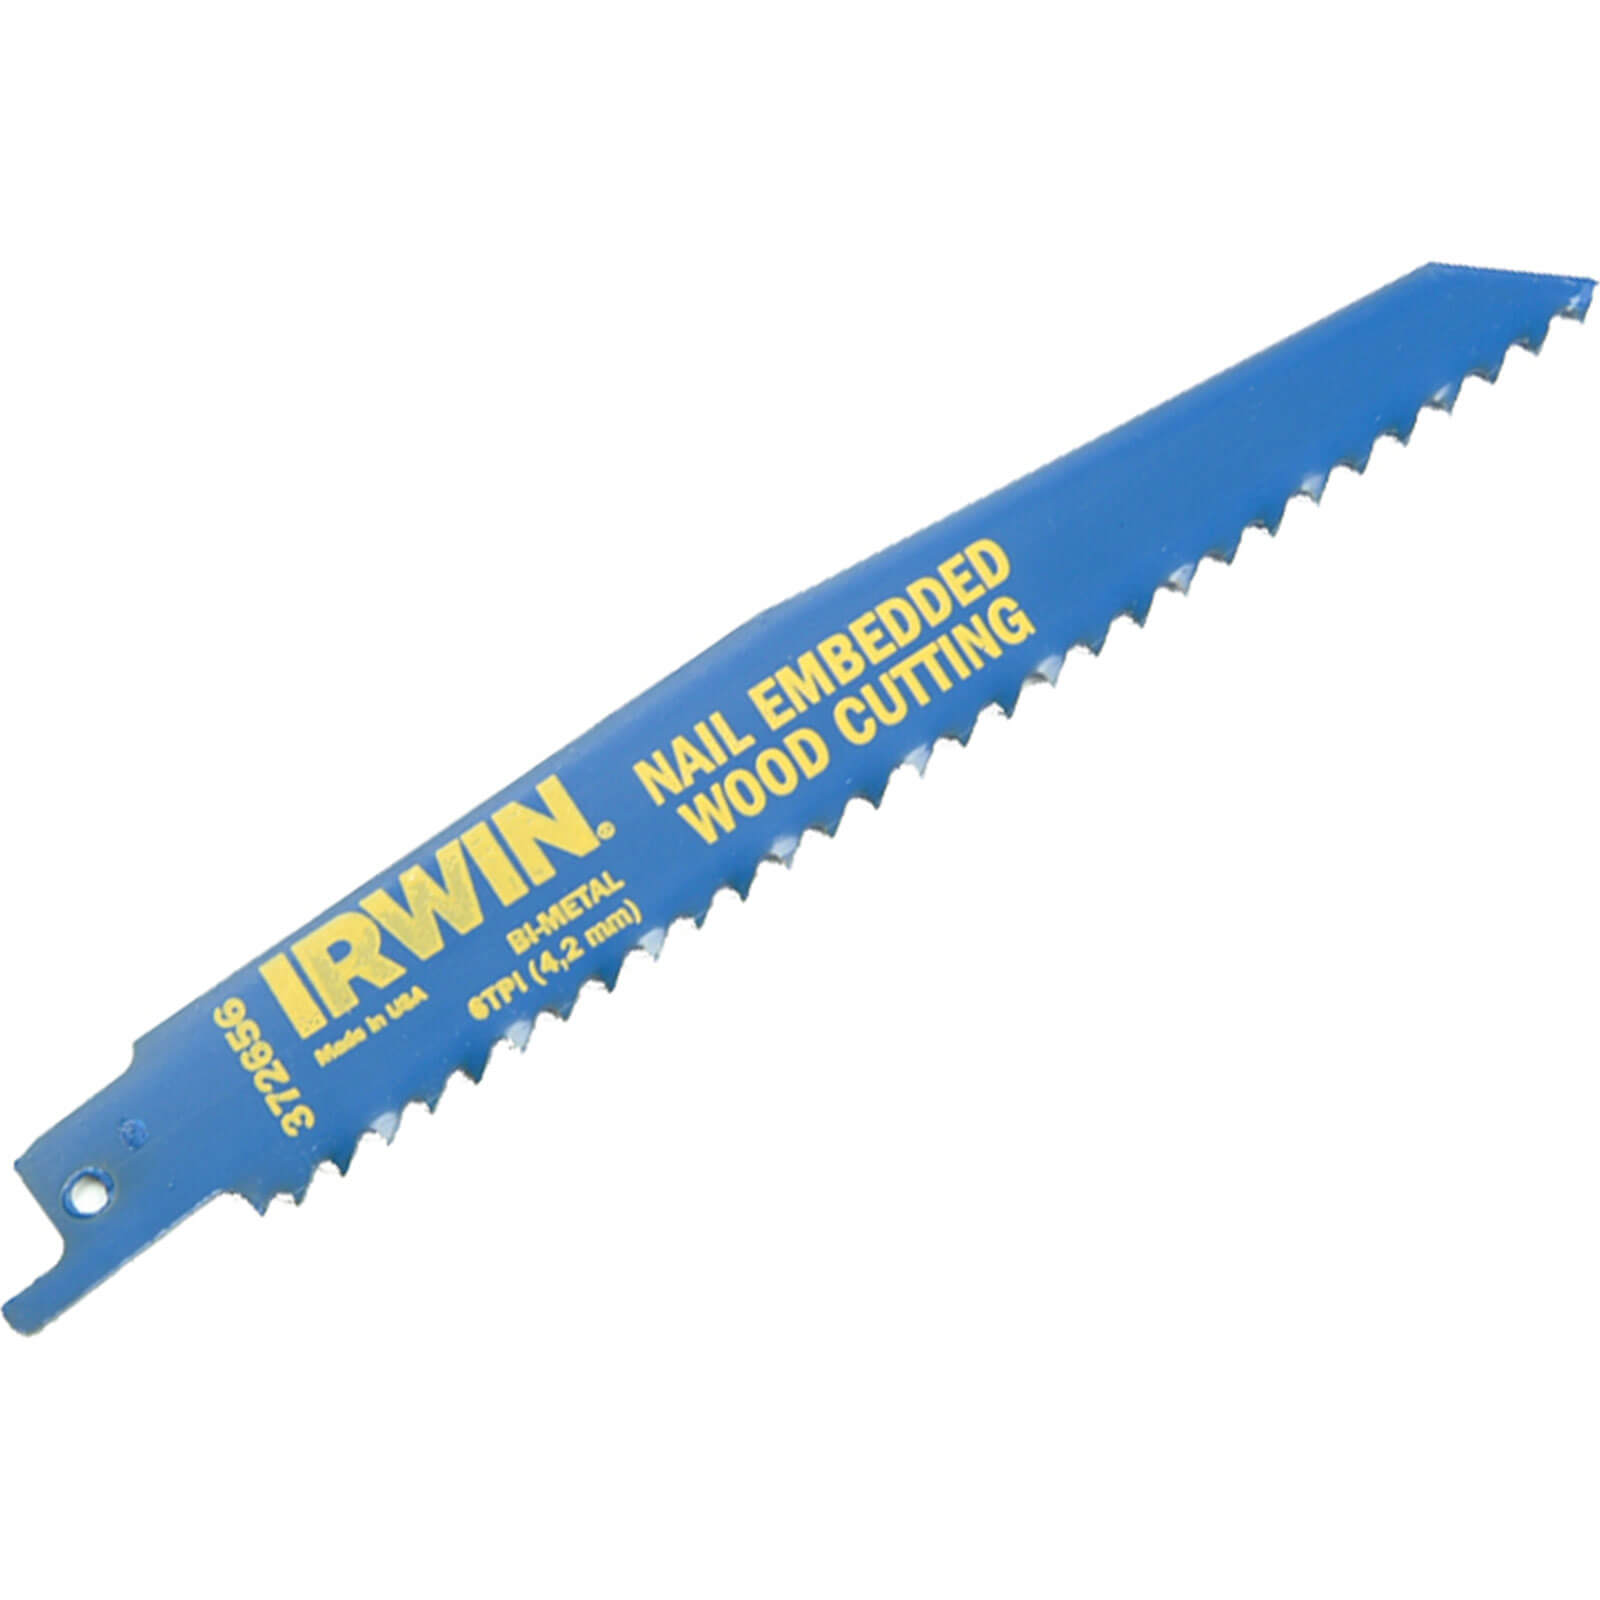 Photos - Power Tool Accessory IRWIN 956R Reciprocating Saw Blades for Wood and Nails 225mm Pack of 5 IRW 